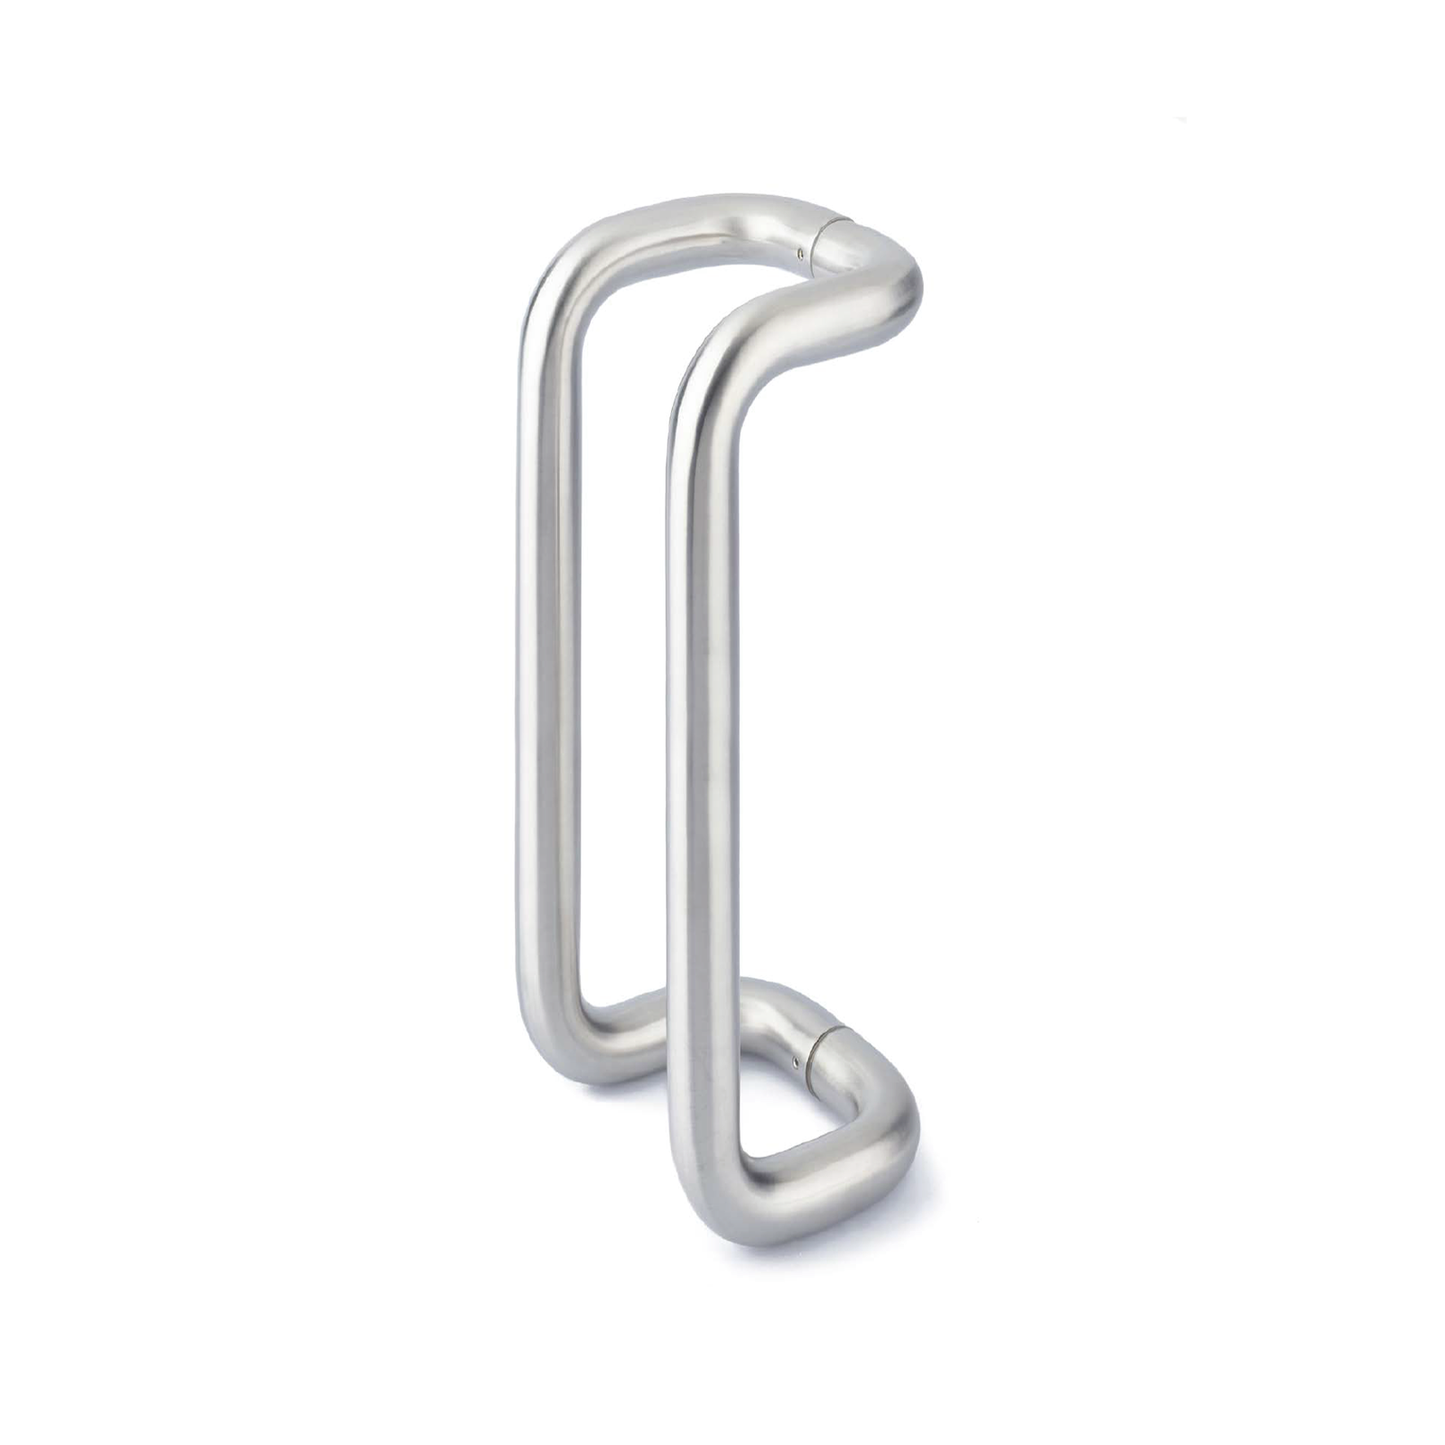 Satin Stainless Steel Cranked Back to Back Door Pull Handles (Pair) 600mm x 32mm